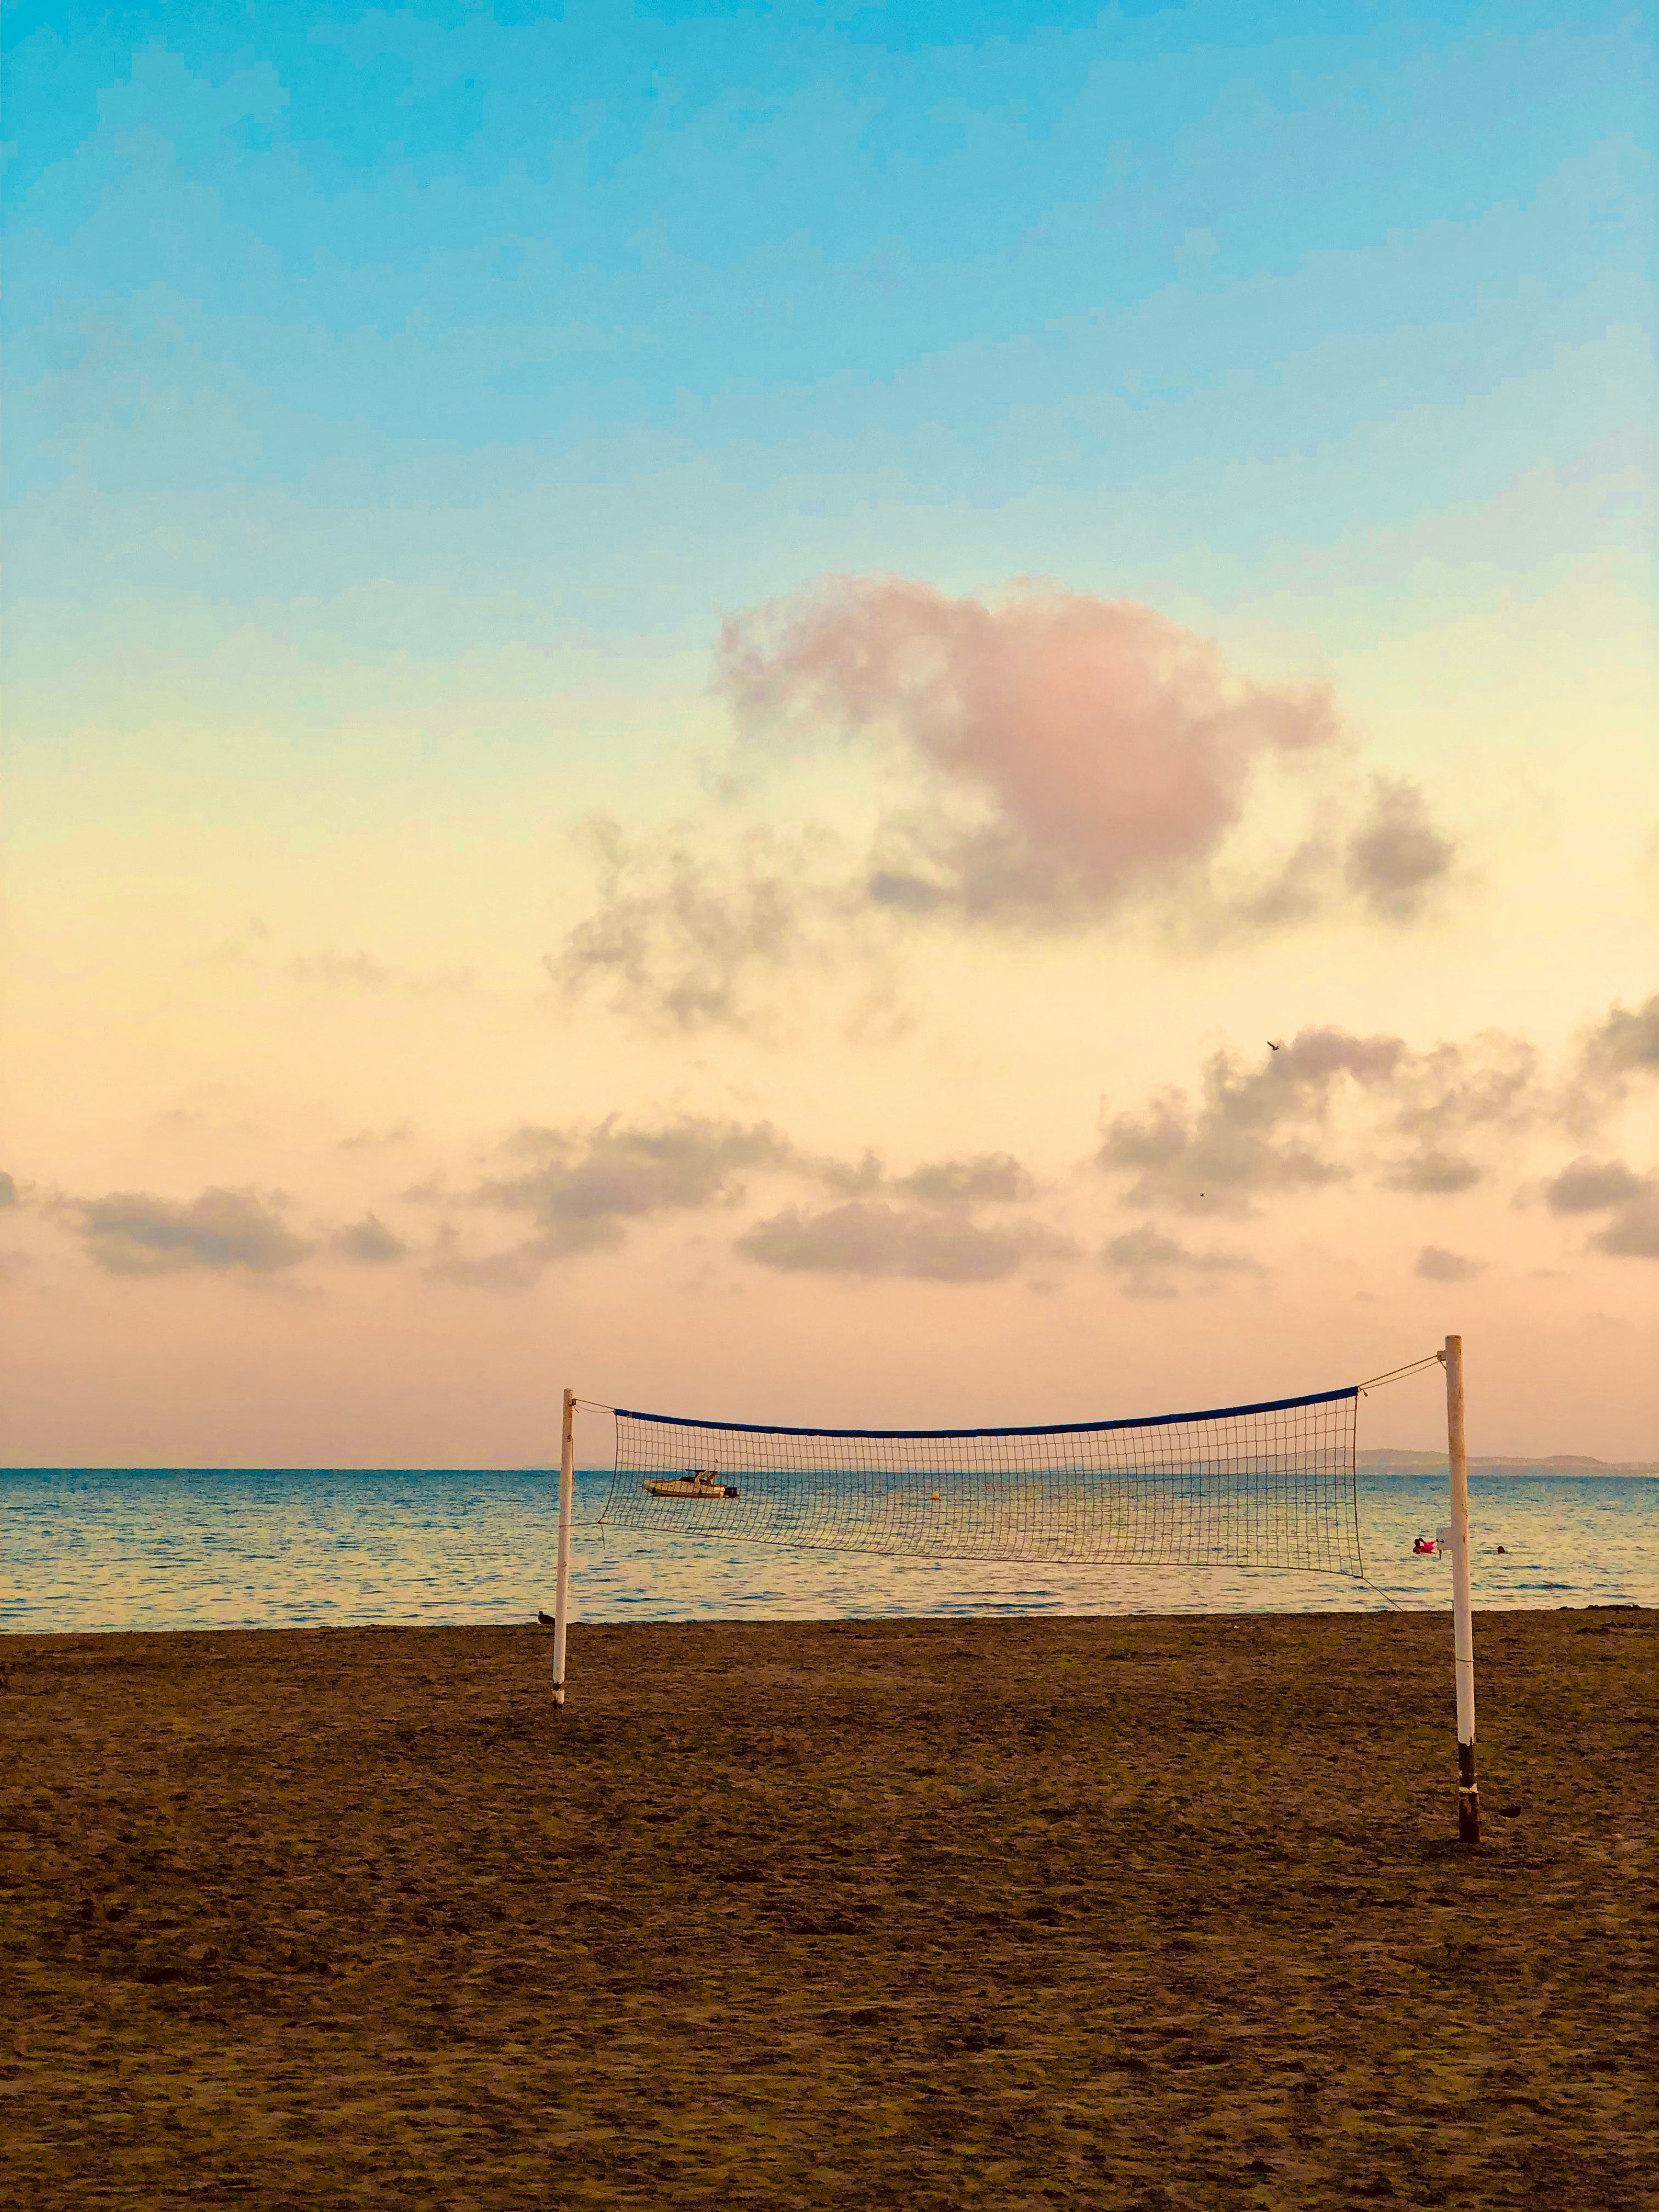 Mobile wallpaper: Volleyball, Volleyball Net, Horizon, Sea, Nature, Beach, 60866 download the picture for free